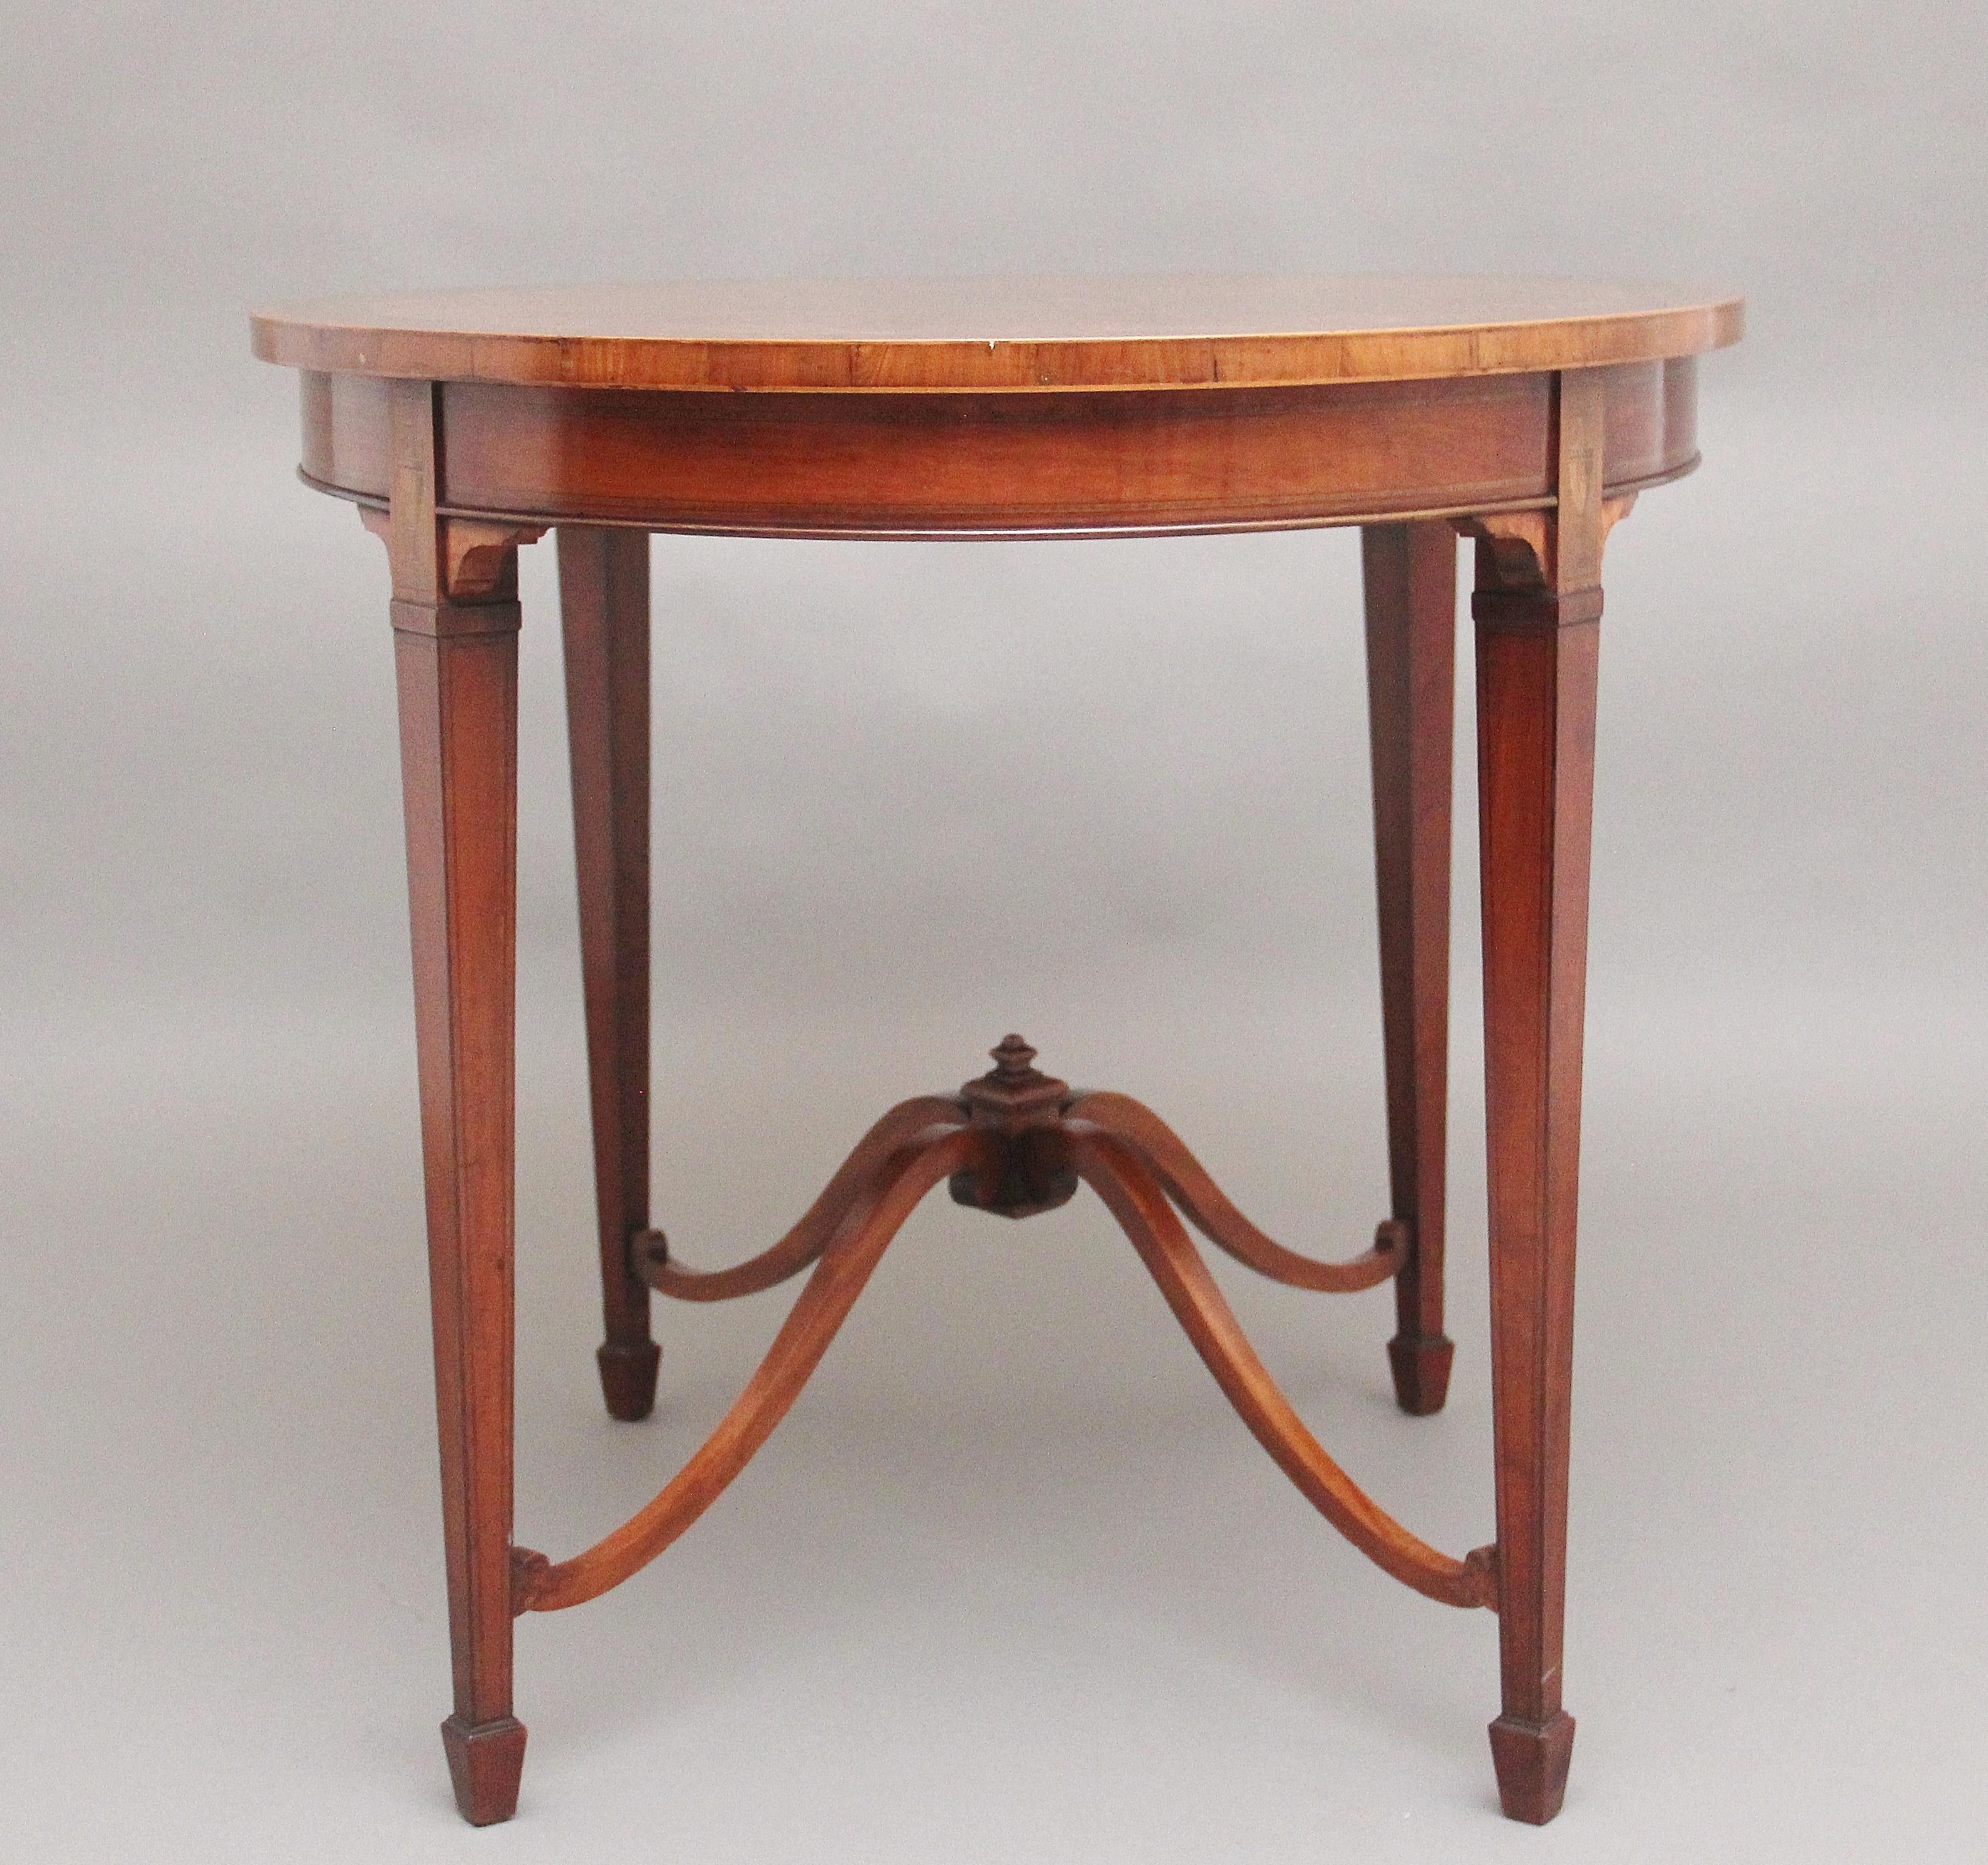 British 19th Century Inlaid Satinwood Table For Sale